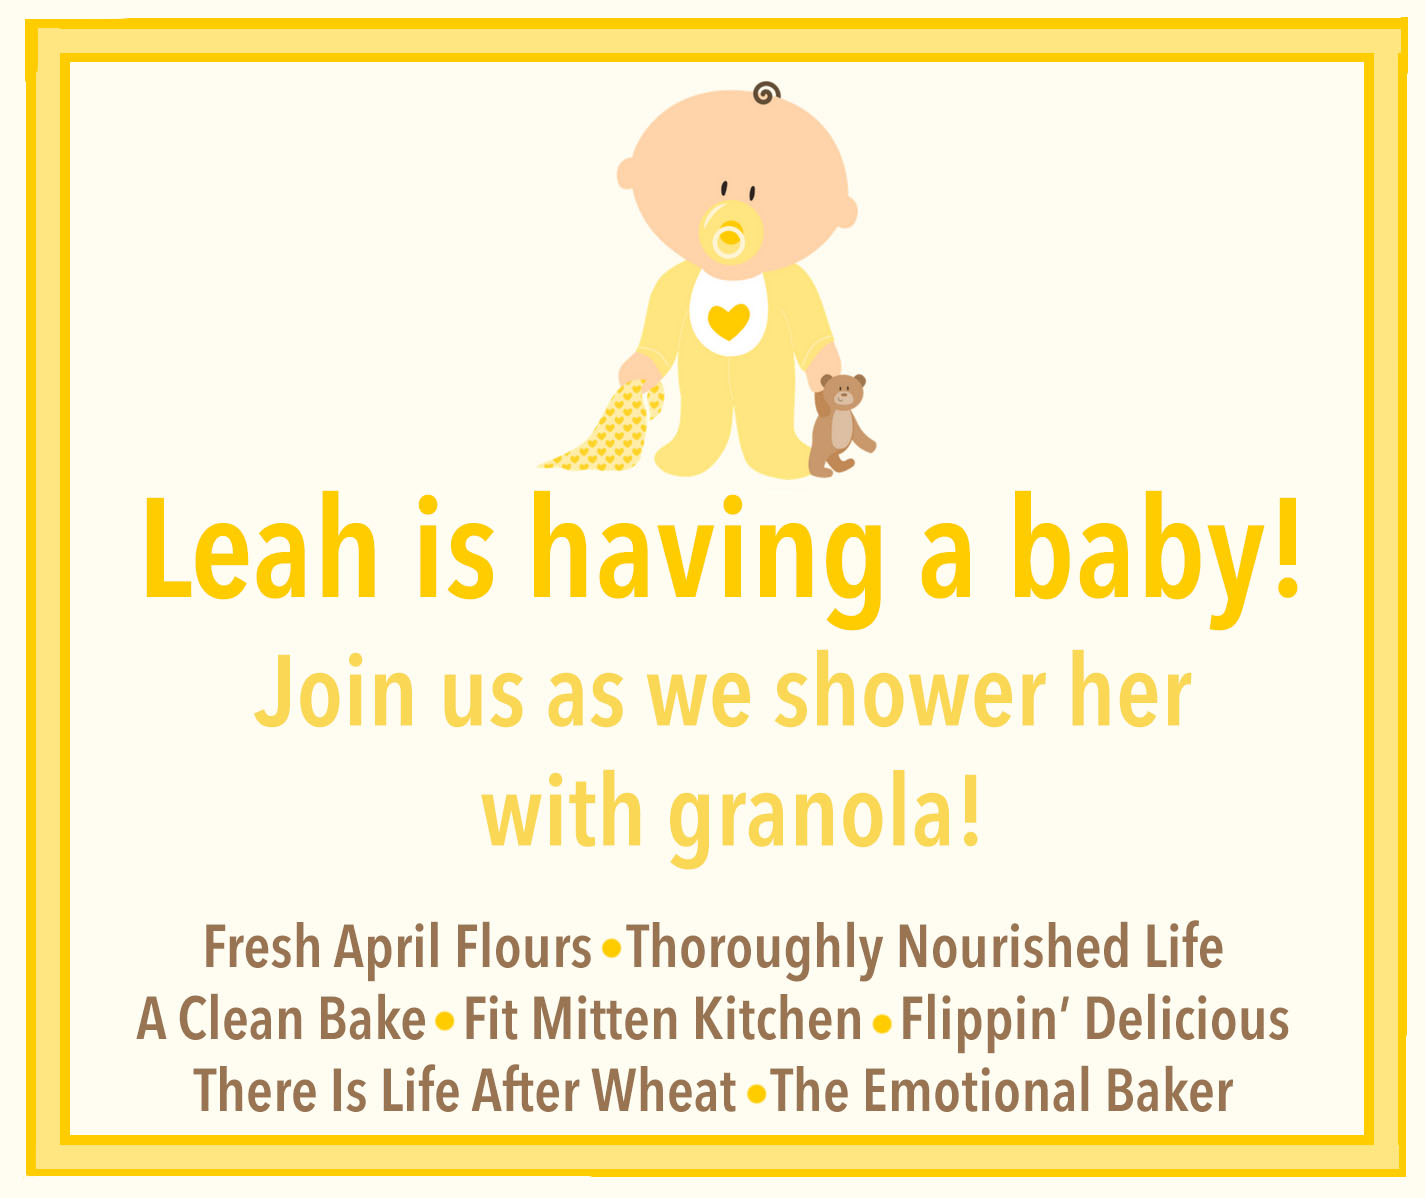 Leah's Baby Shower